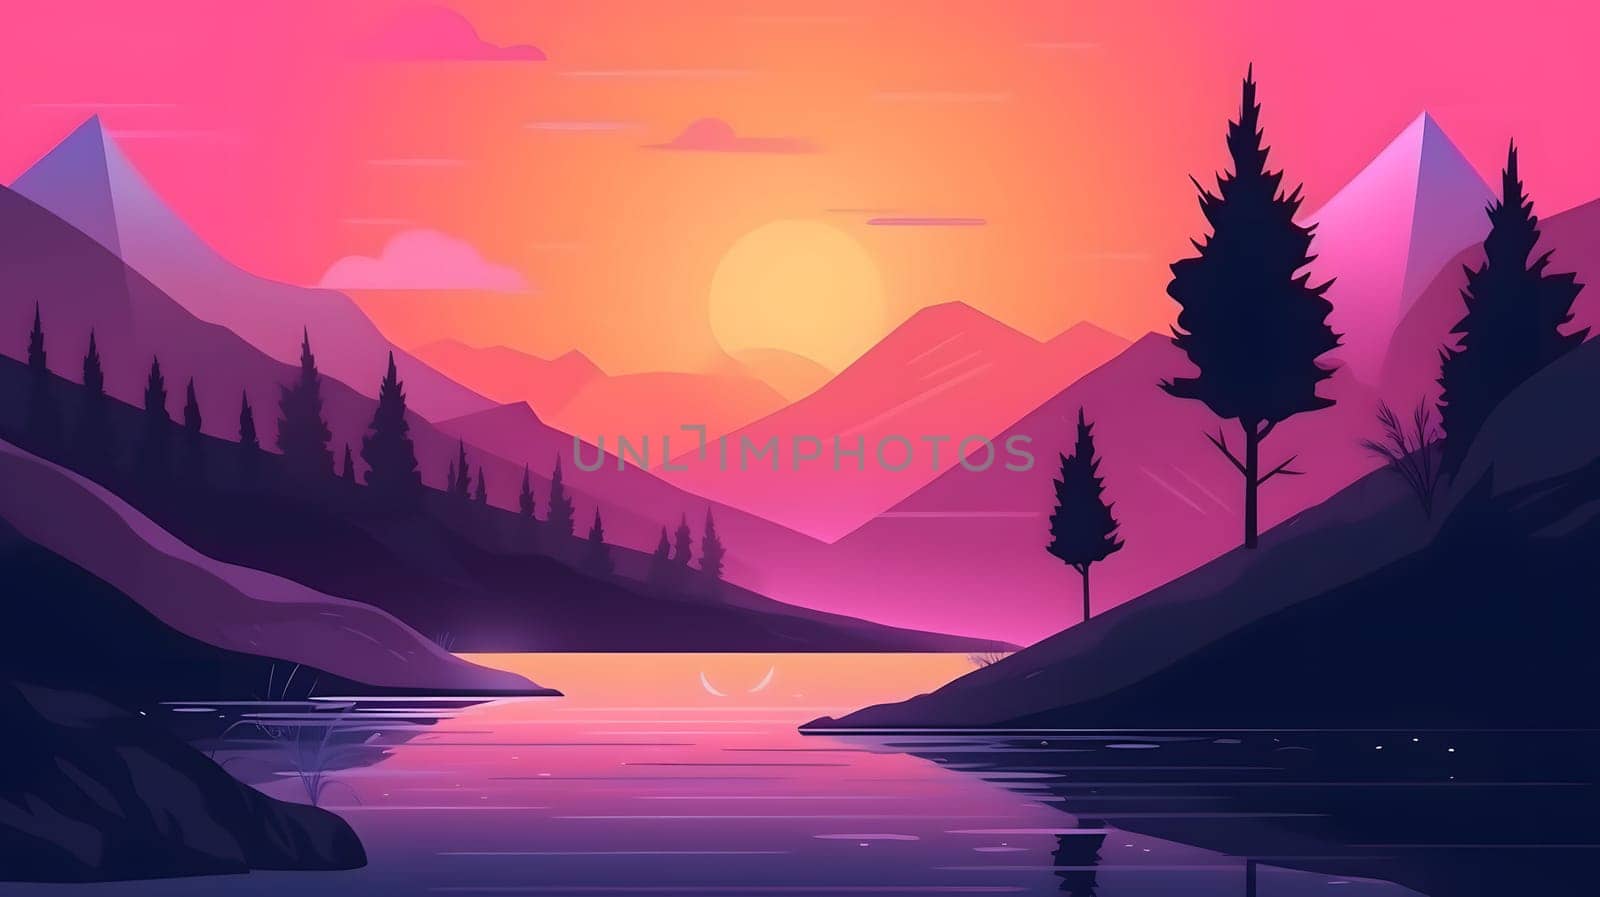 generic low-fi synthvawe gradient sunset landscape in neon colors, neural network generated image by z1b